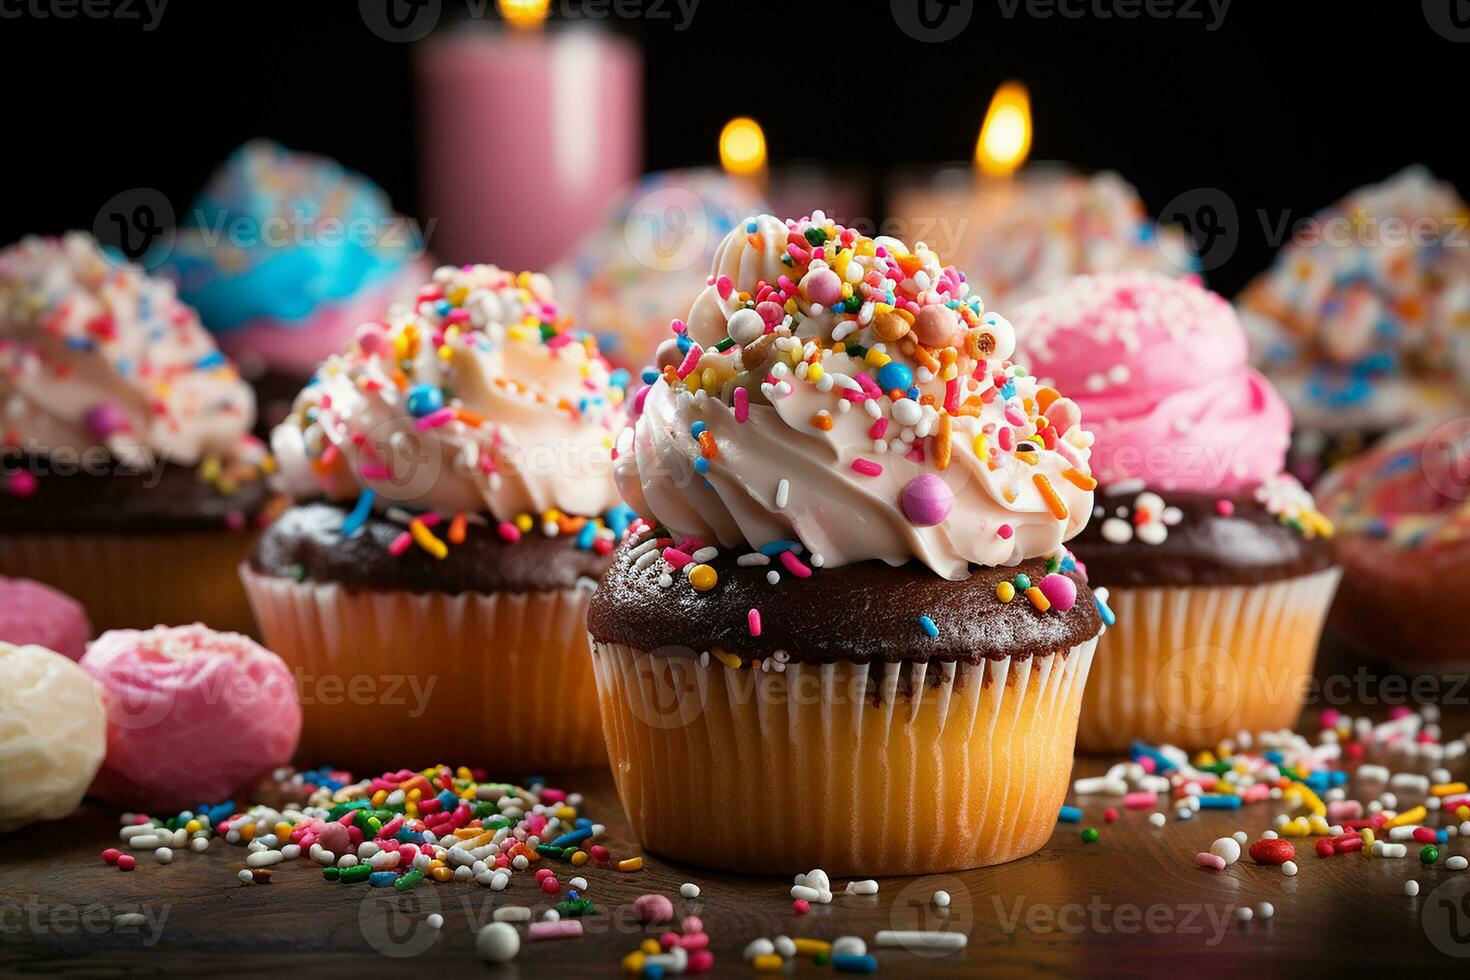 Delicious Dessert Cupcakes with Cream Topping and Sprinkle of Meses and Candy on Wooden Table photo